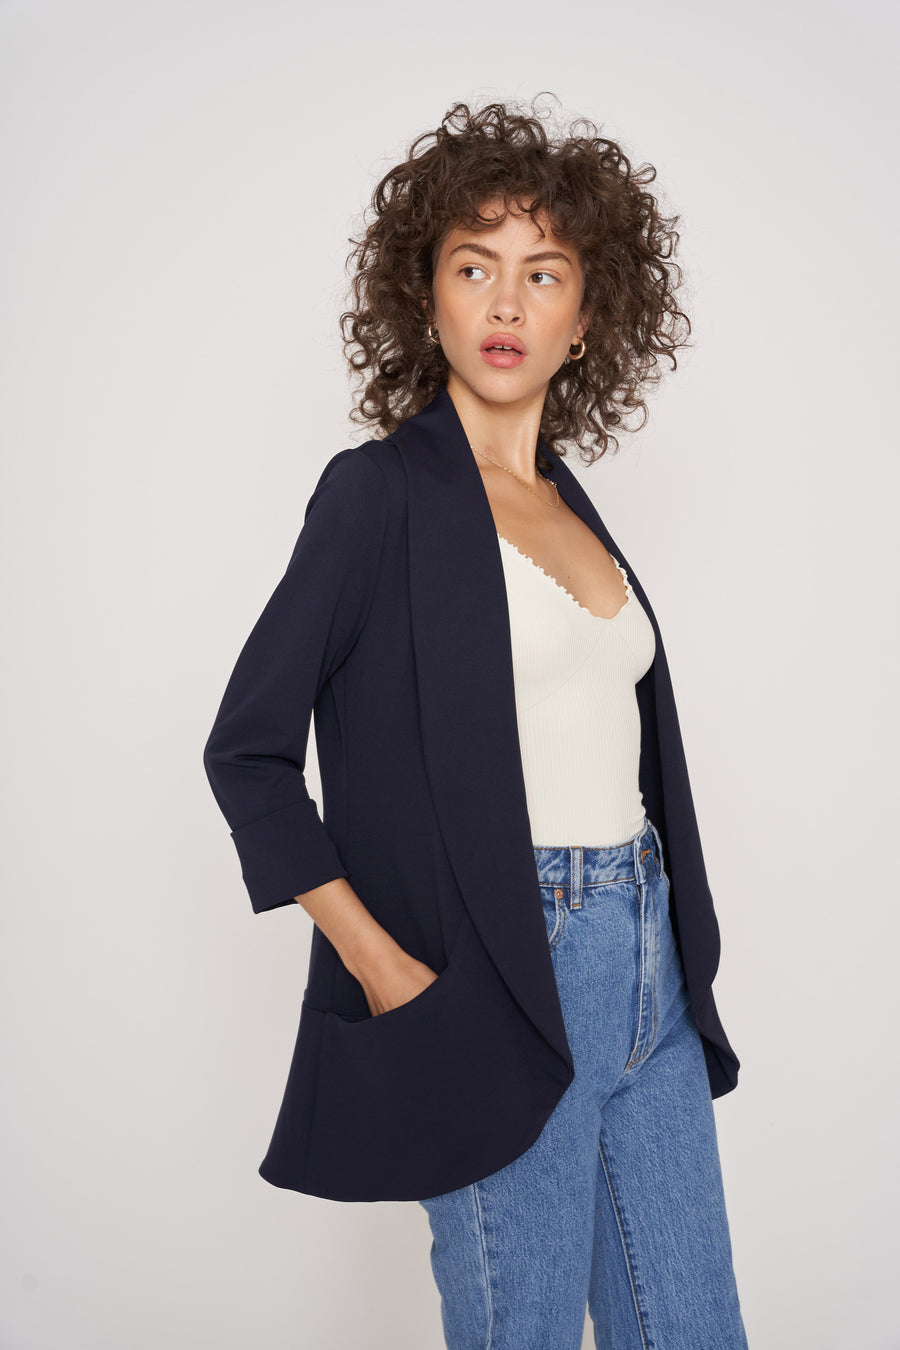 No Srcipt image - Images of 1 of 5 Classic Melanie Shawl Midnight Navy Color Staple Workwear Blazer